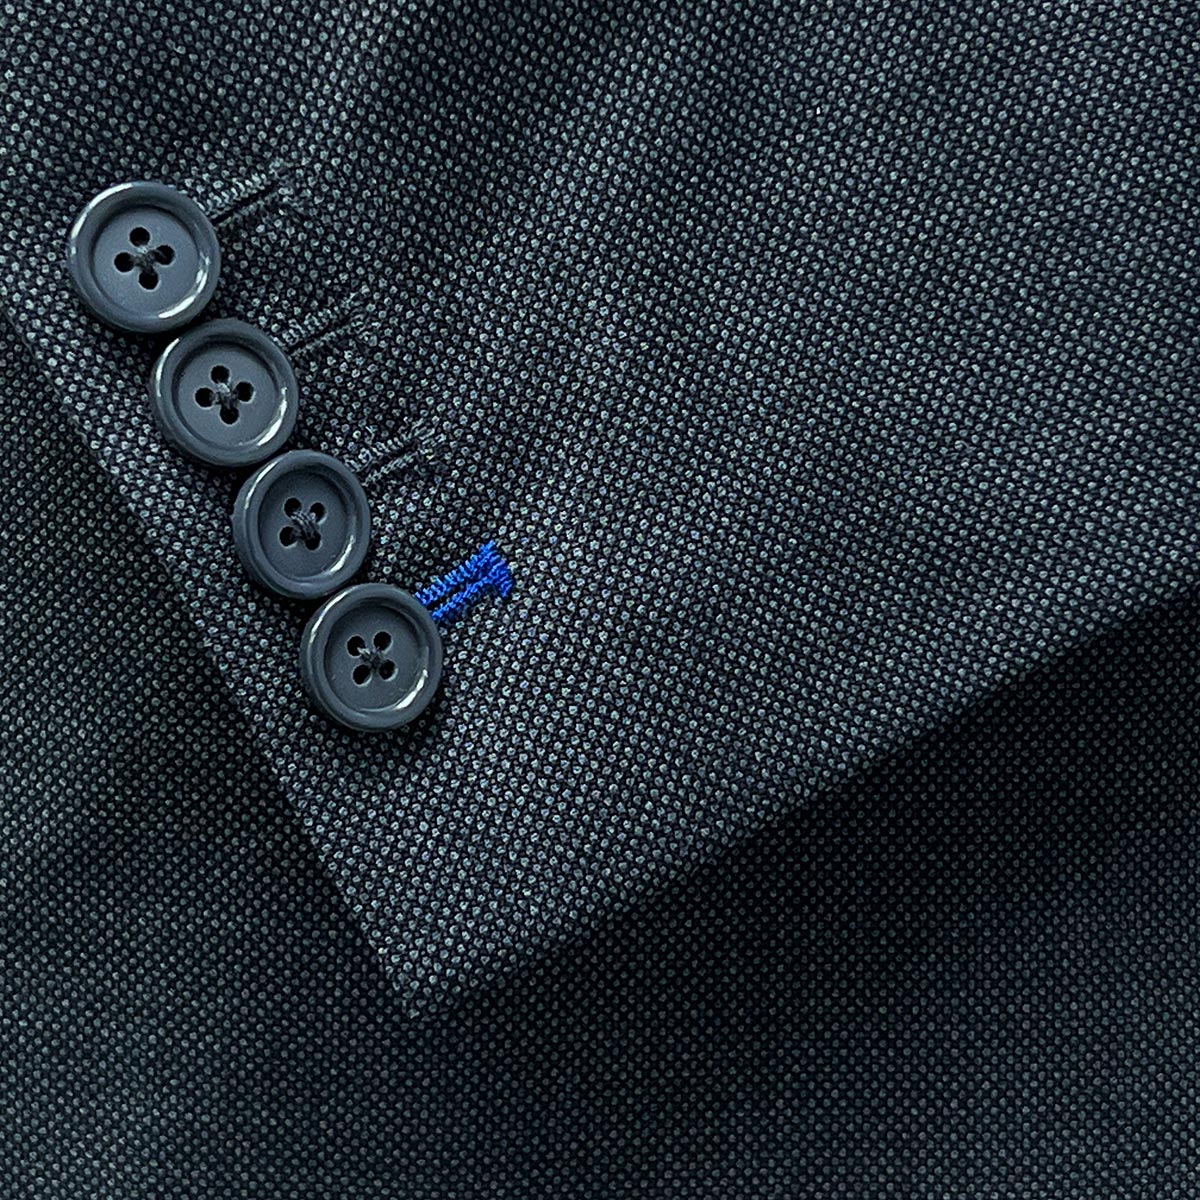 Functional sleeve buttonholes offering both style and utility on a dark grey birdseye suit.